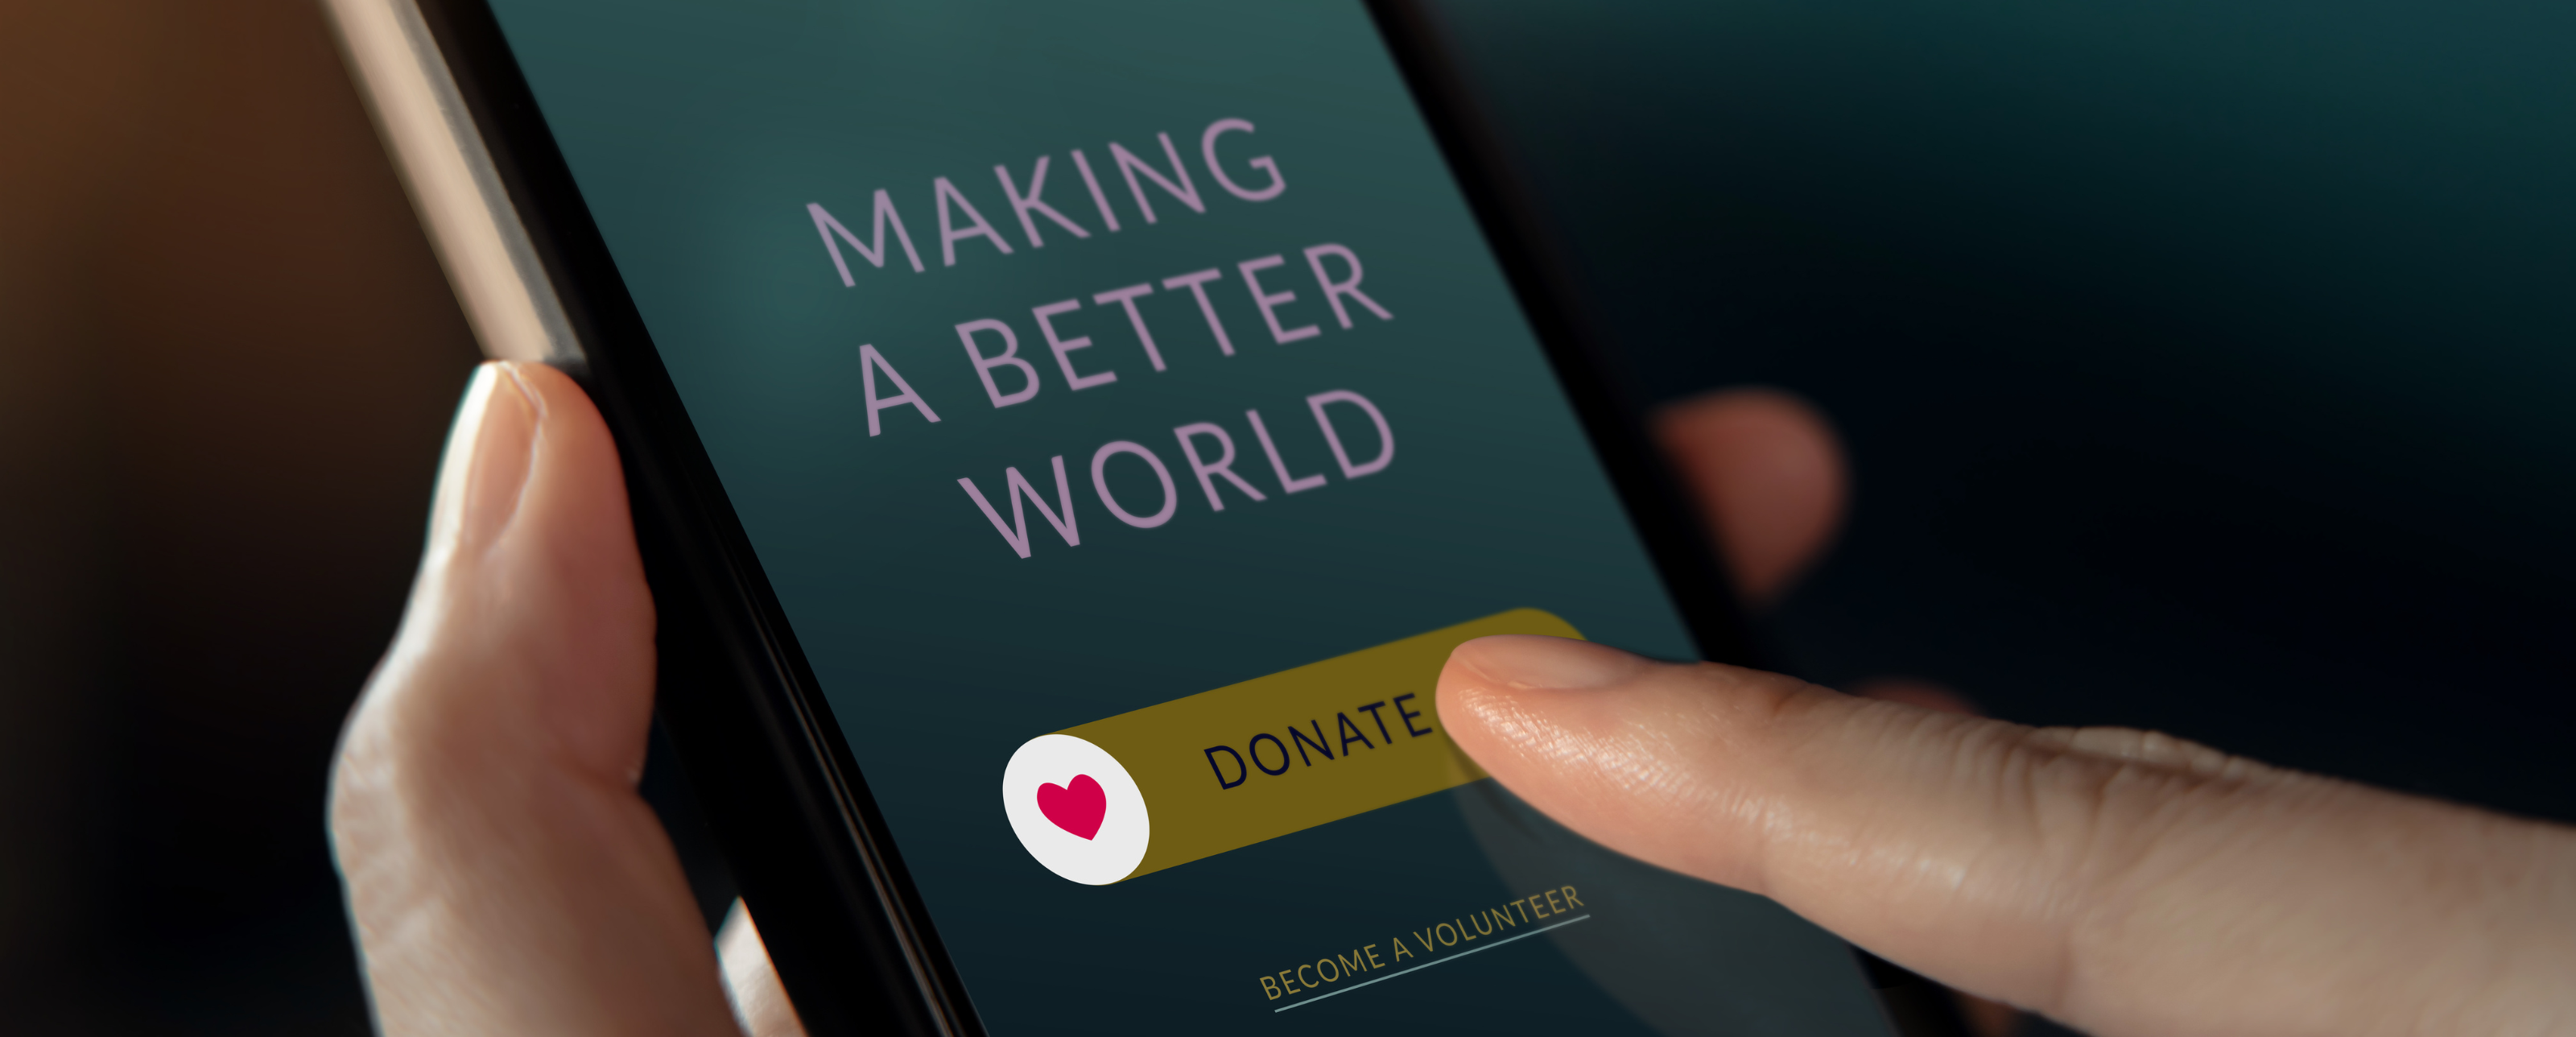 Supercharging the charity sector with digital transformation projects